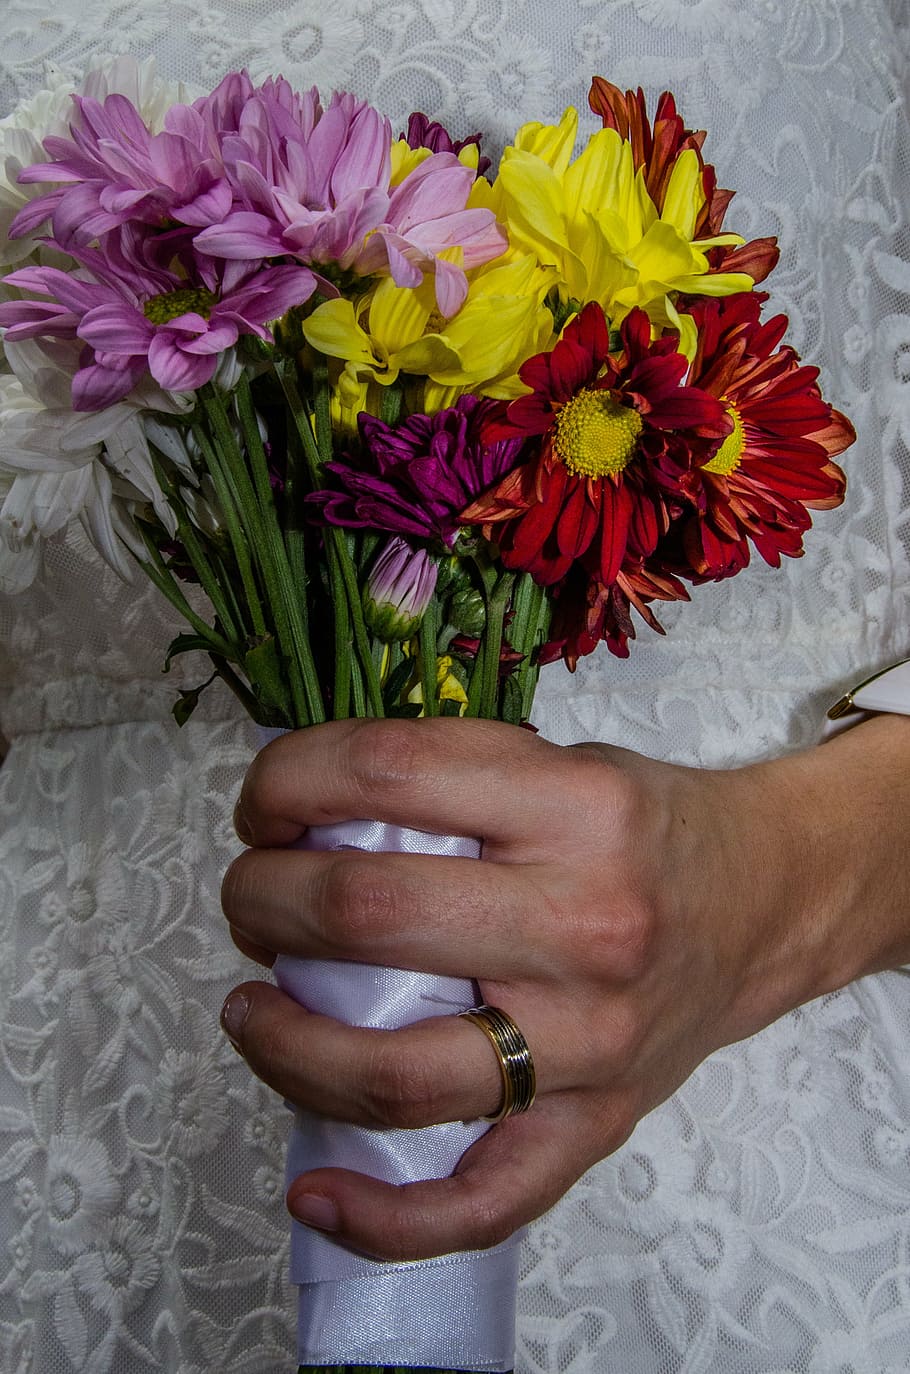 flower, boque, alliance, income, marriage, human hand, hand, flowering plant, one person, holding